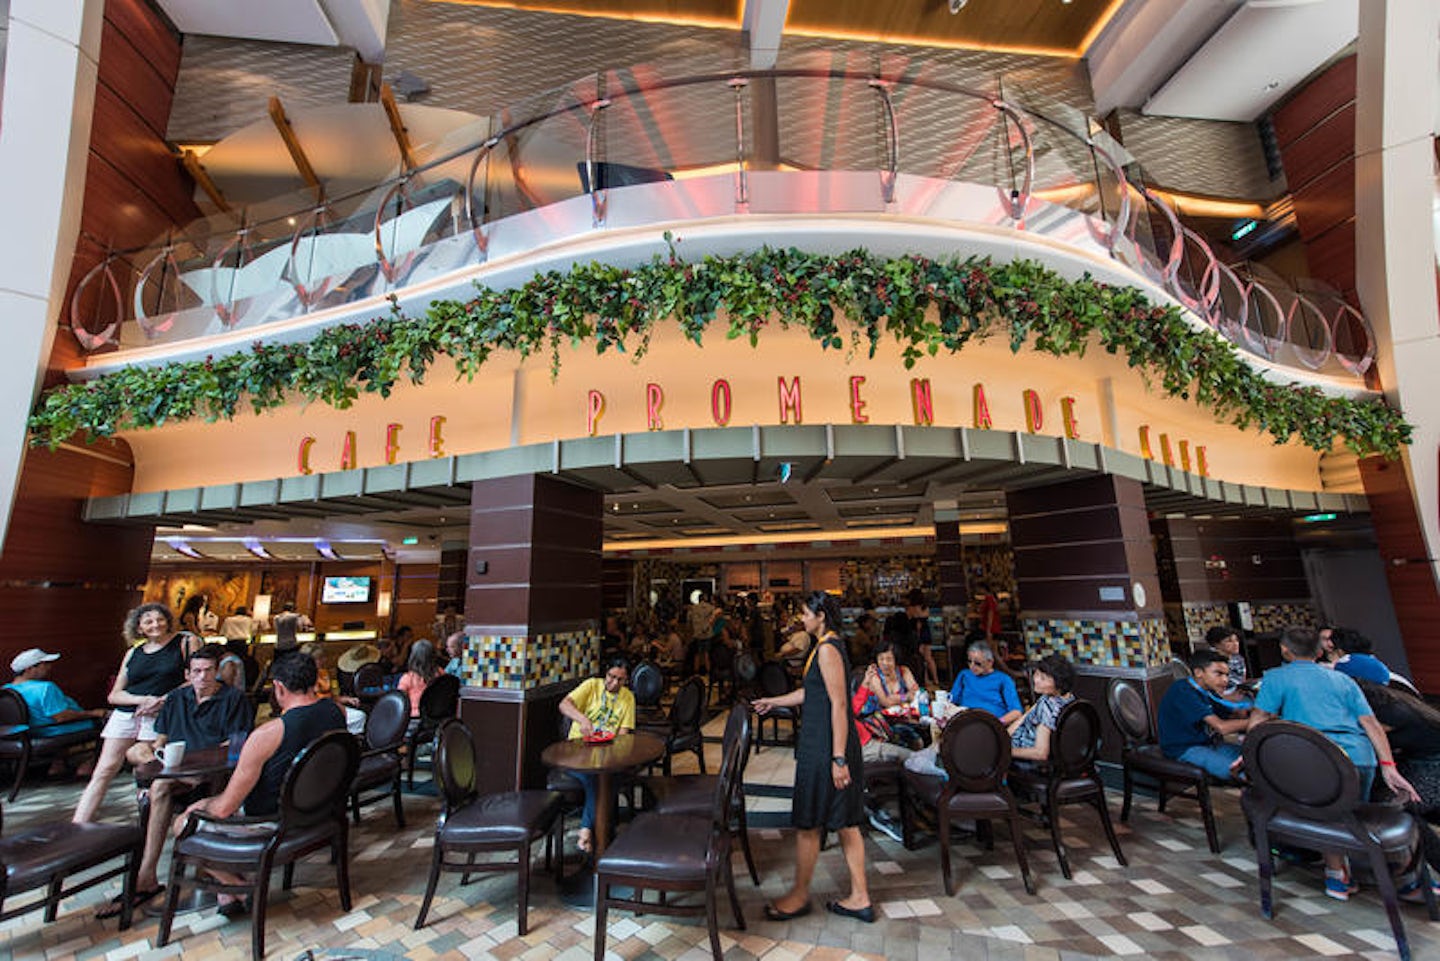 Cafe Promenade on Oasis of the Seas